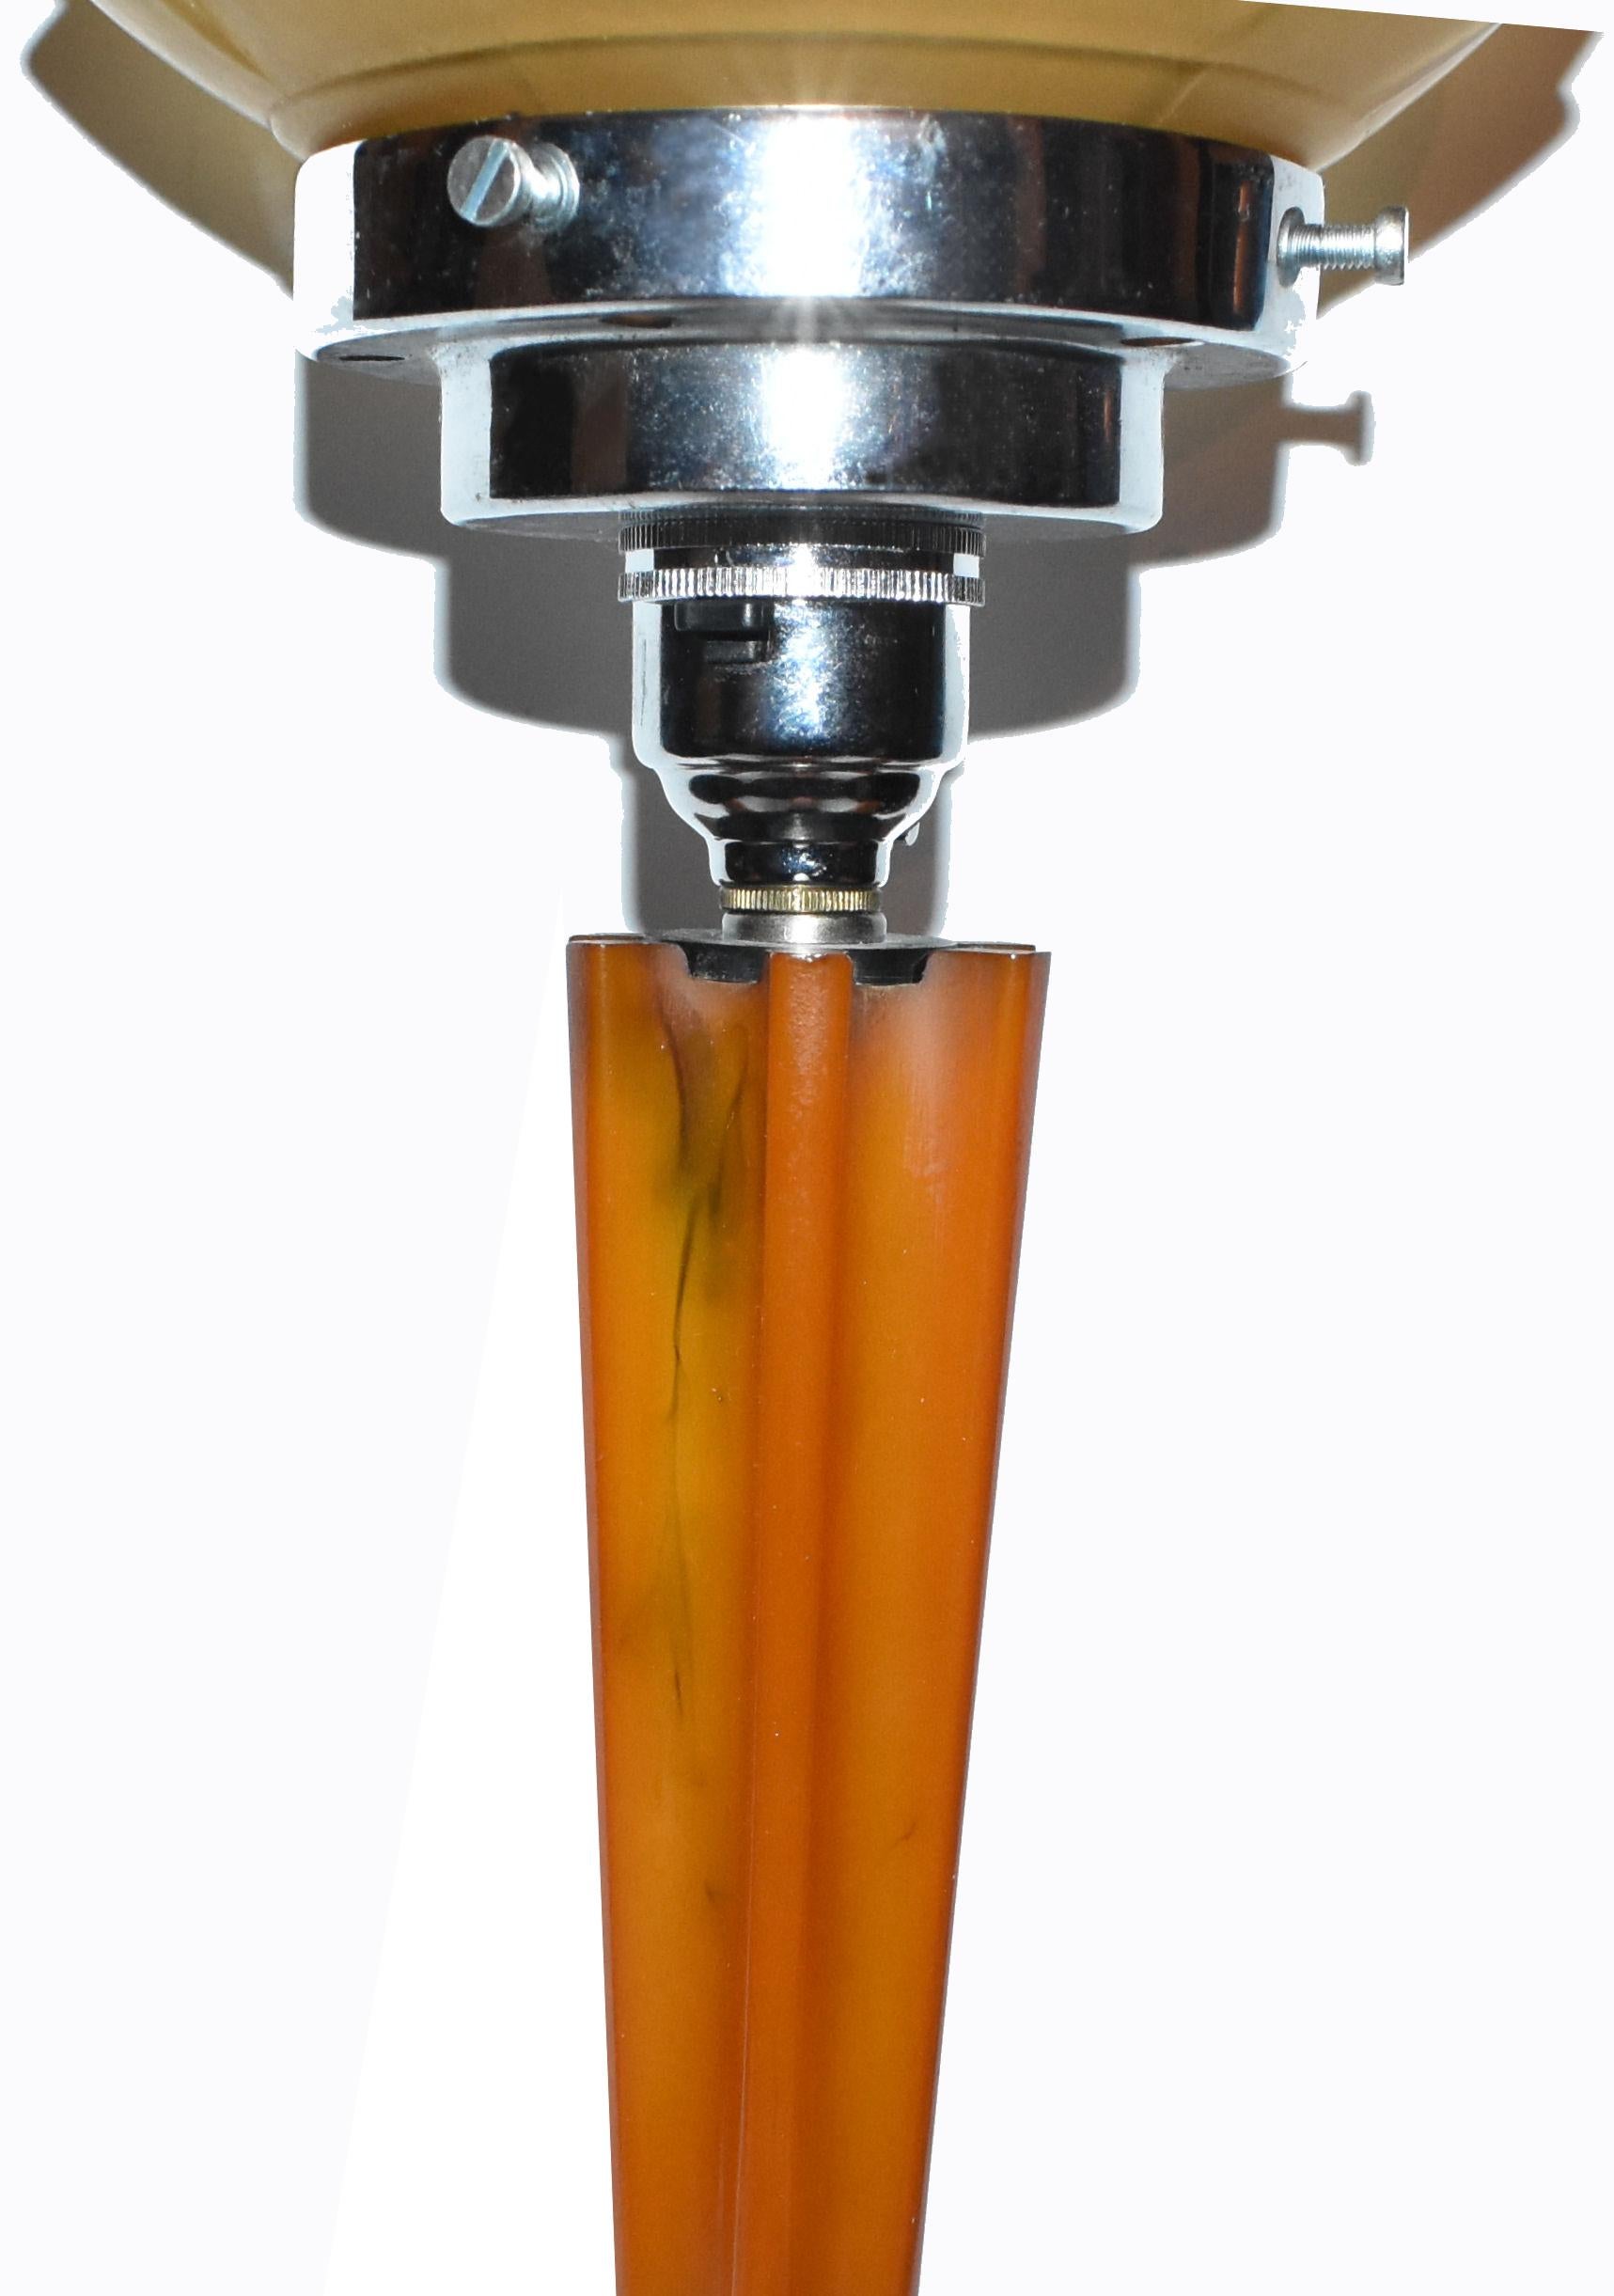 A very stylish example of another Art Deco Classic is this 1930s Art Deco catalin bakelite lamp. A stunning caramel colored ribbed catalin bakelite stem sits atop an all chrome circular stepped base with a chrome bayonet fitting and gallery. All